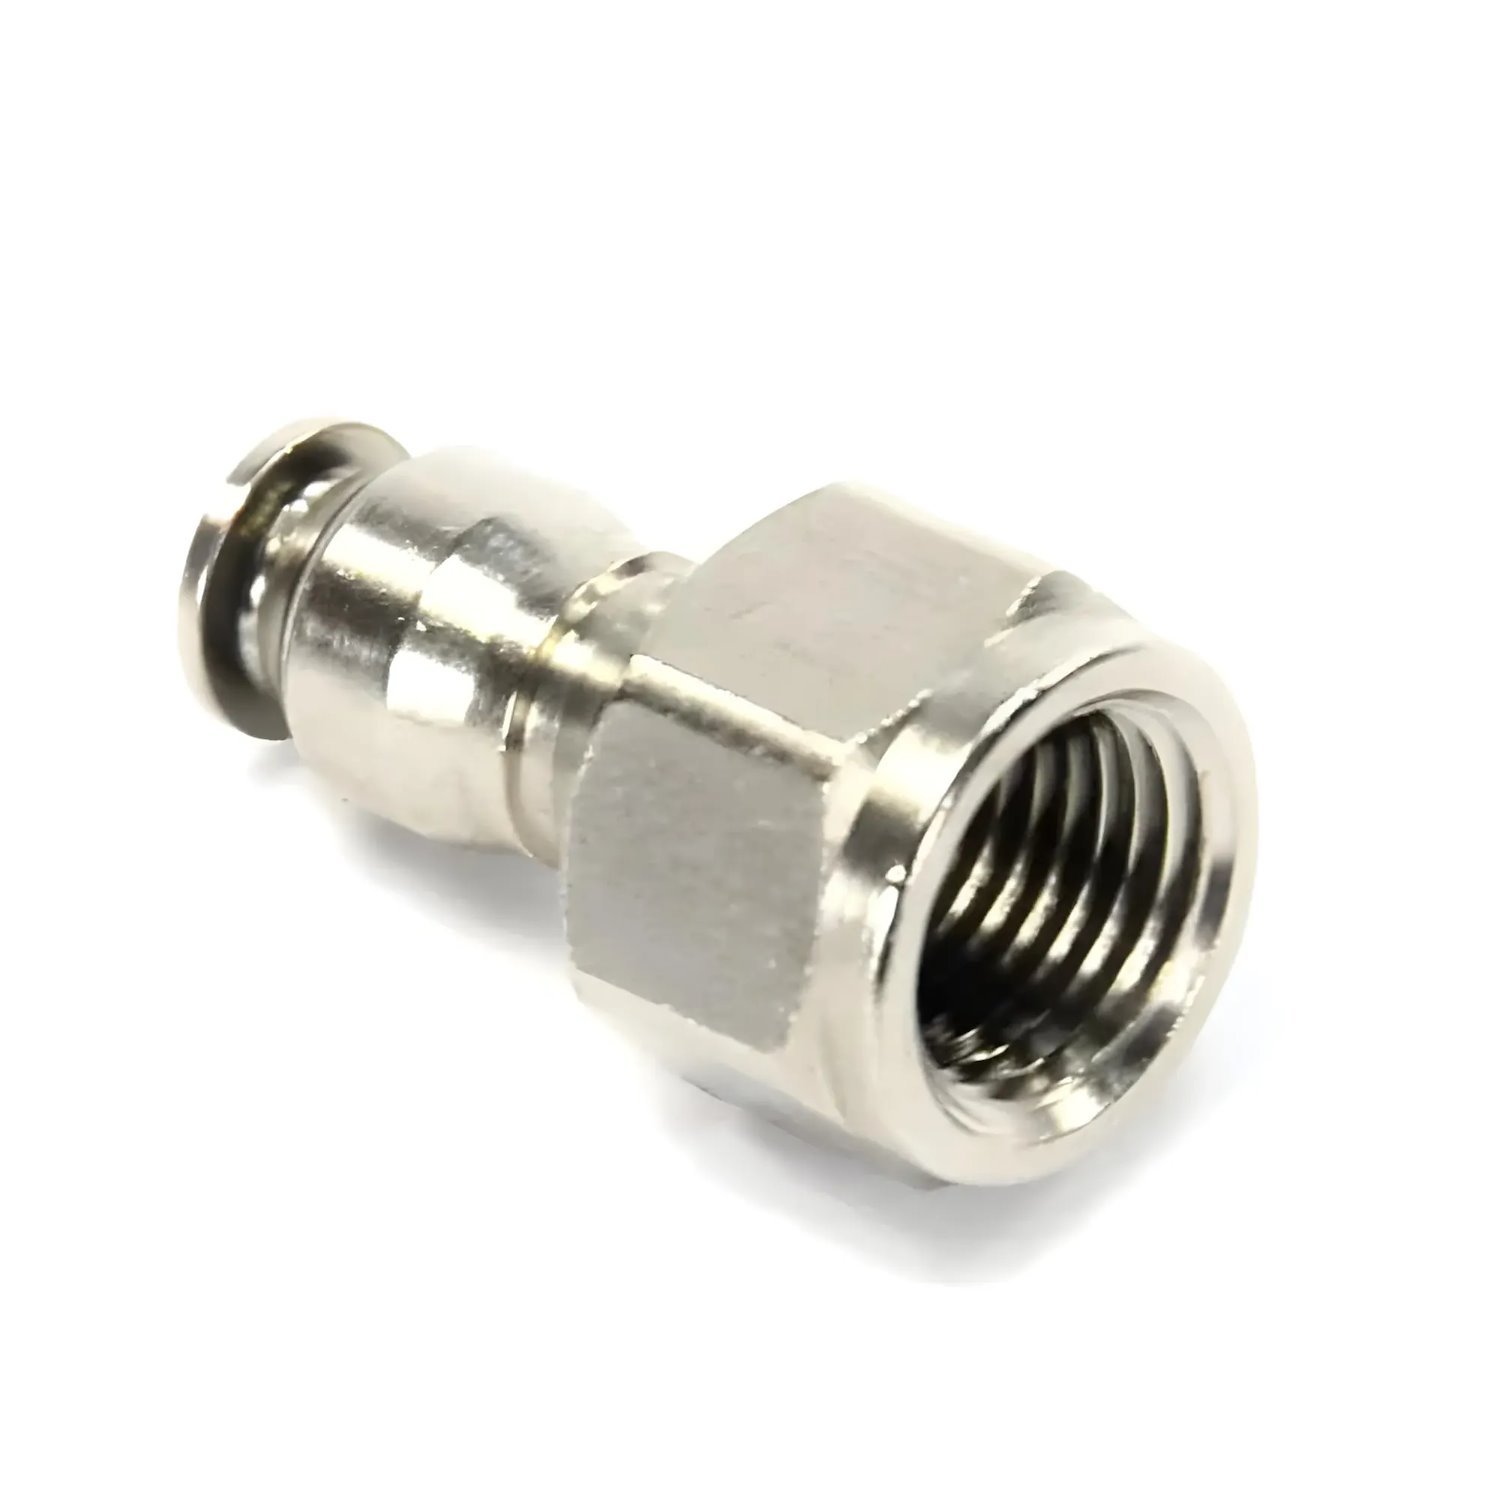 00-01561 1/8 in. Tube x 3AN Female NPT Push-to-Connect Fitting